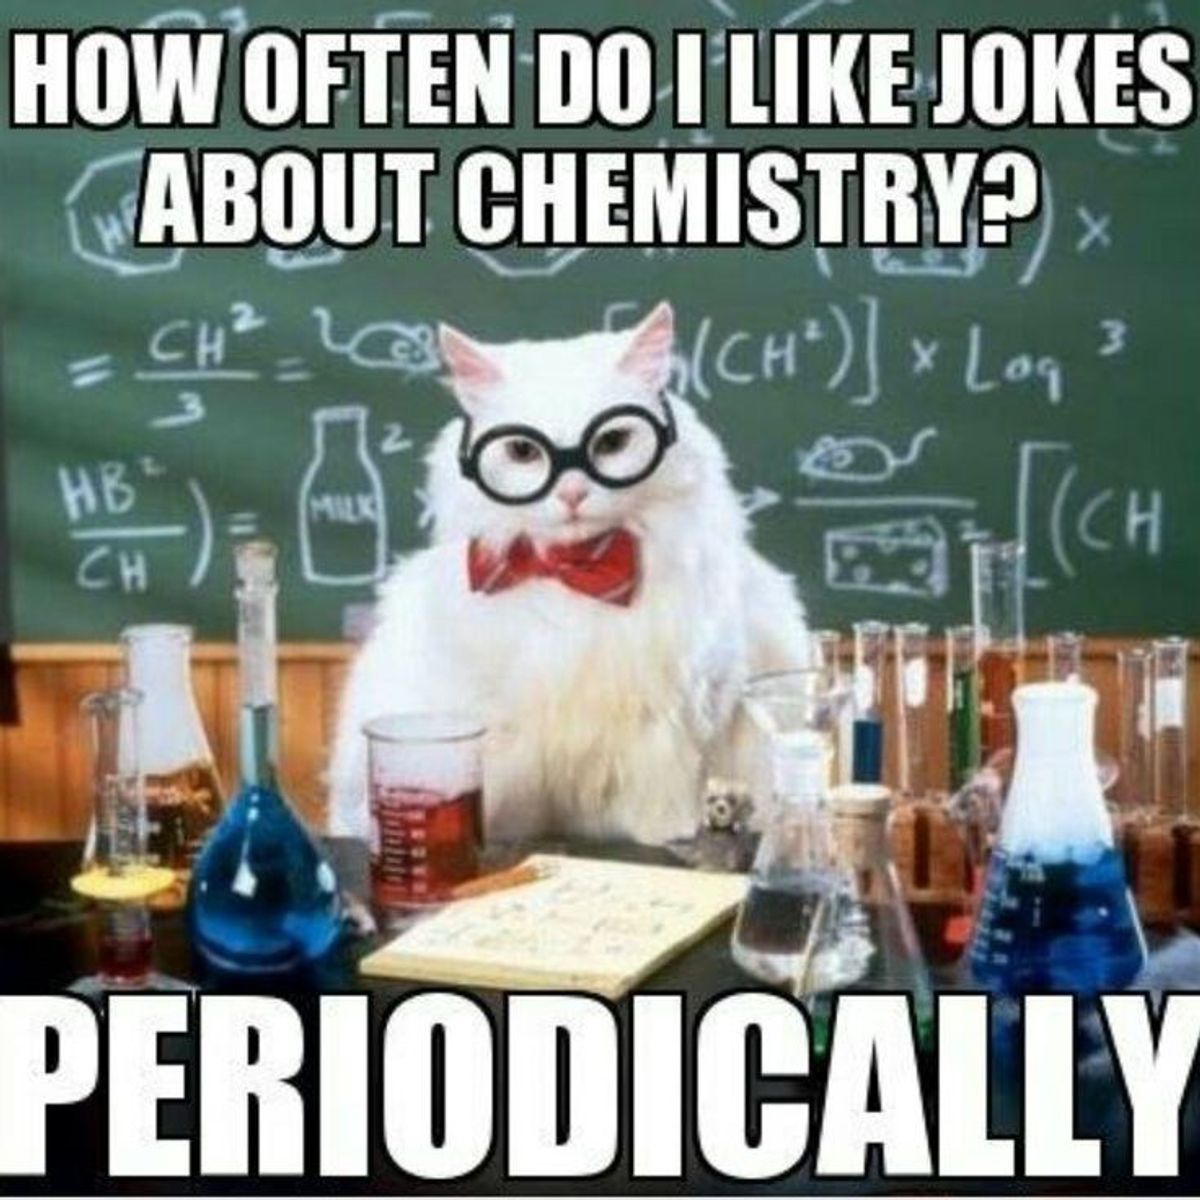 30 (Mostly) Science Jokes To Brighten Your Day